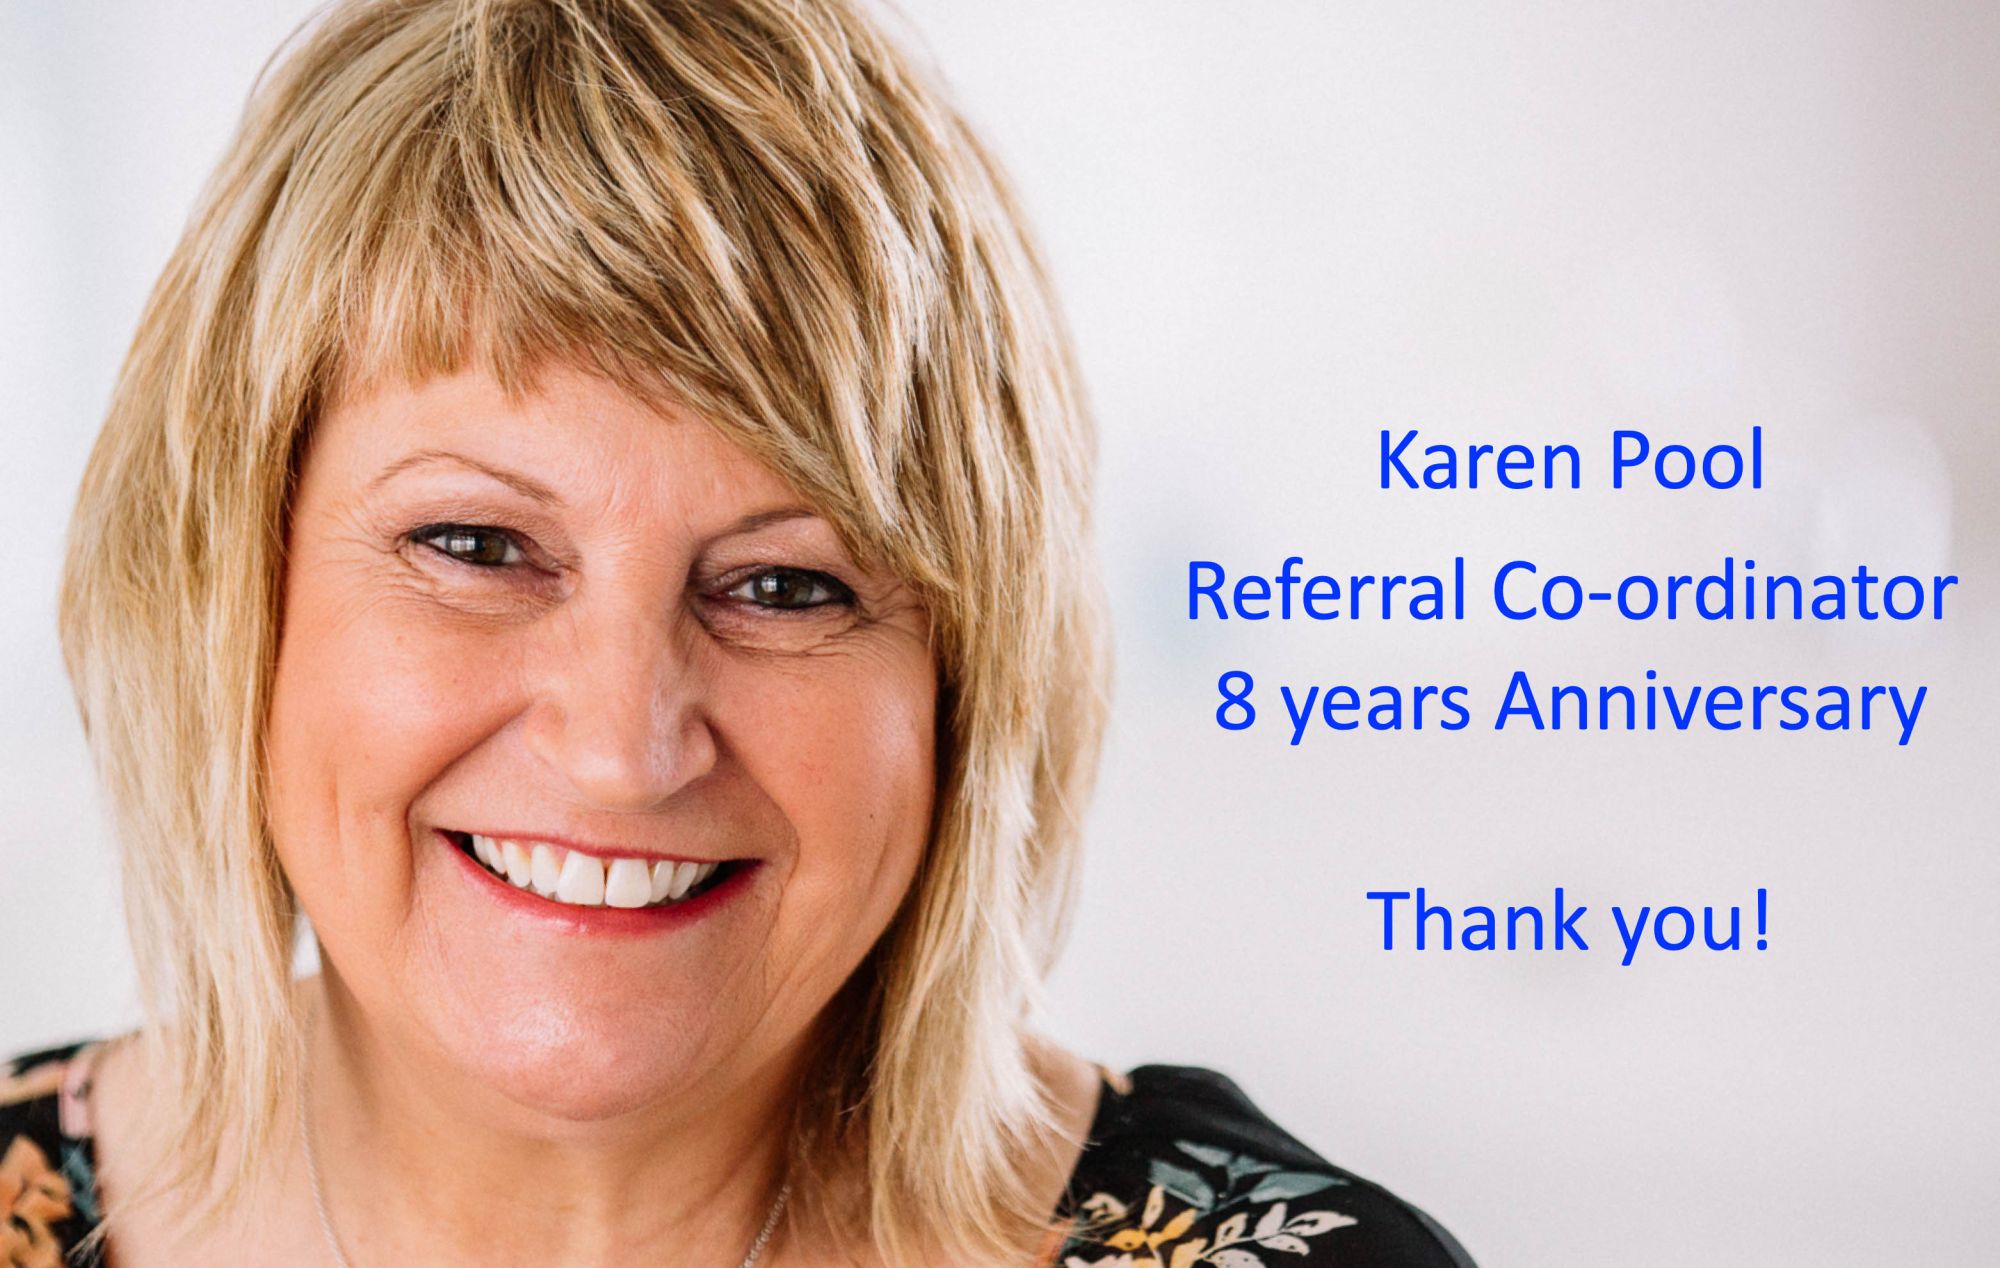 Karen - our Referral Co-ordinator's 8th year anniversary